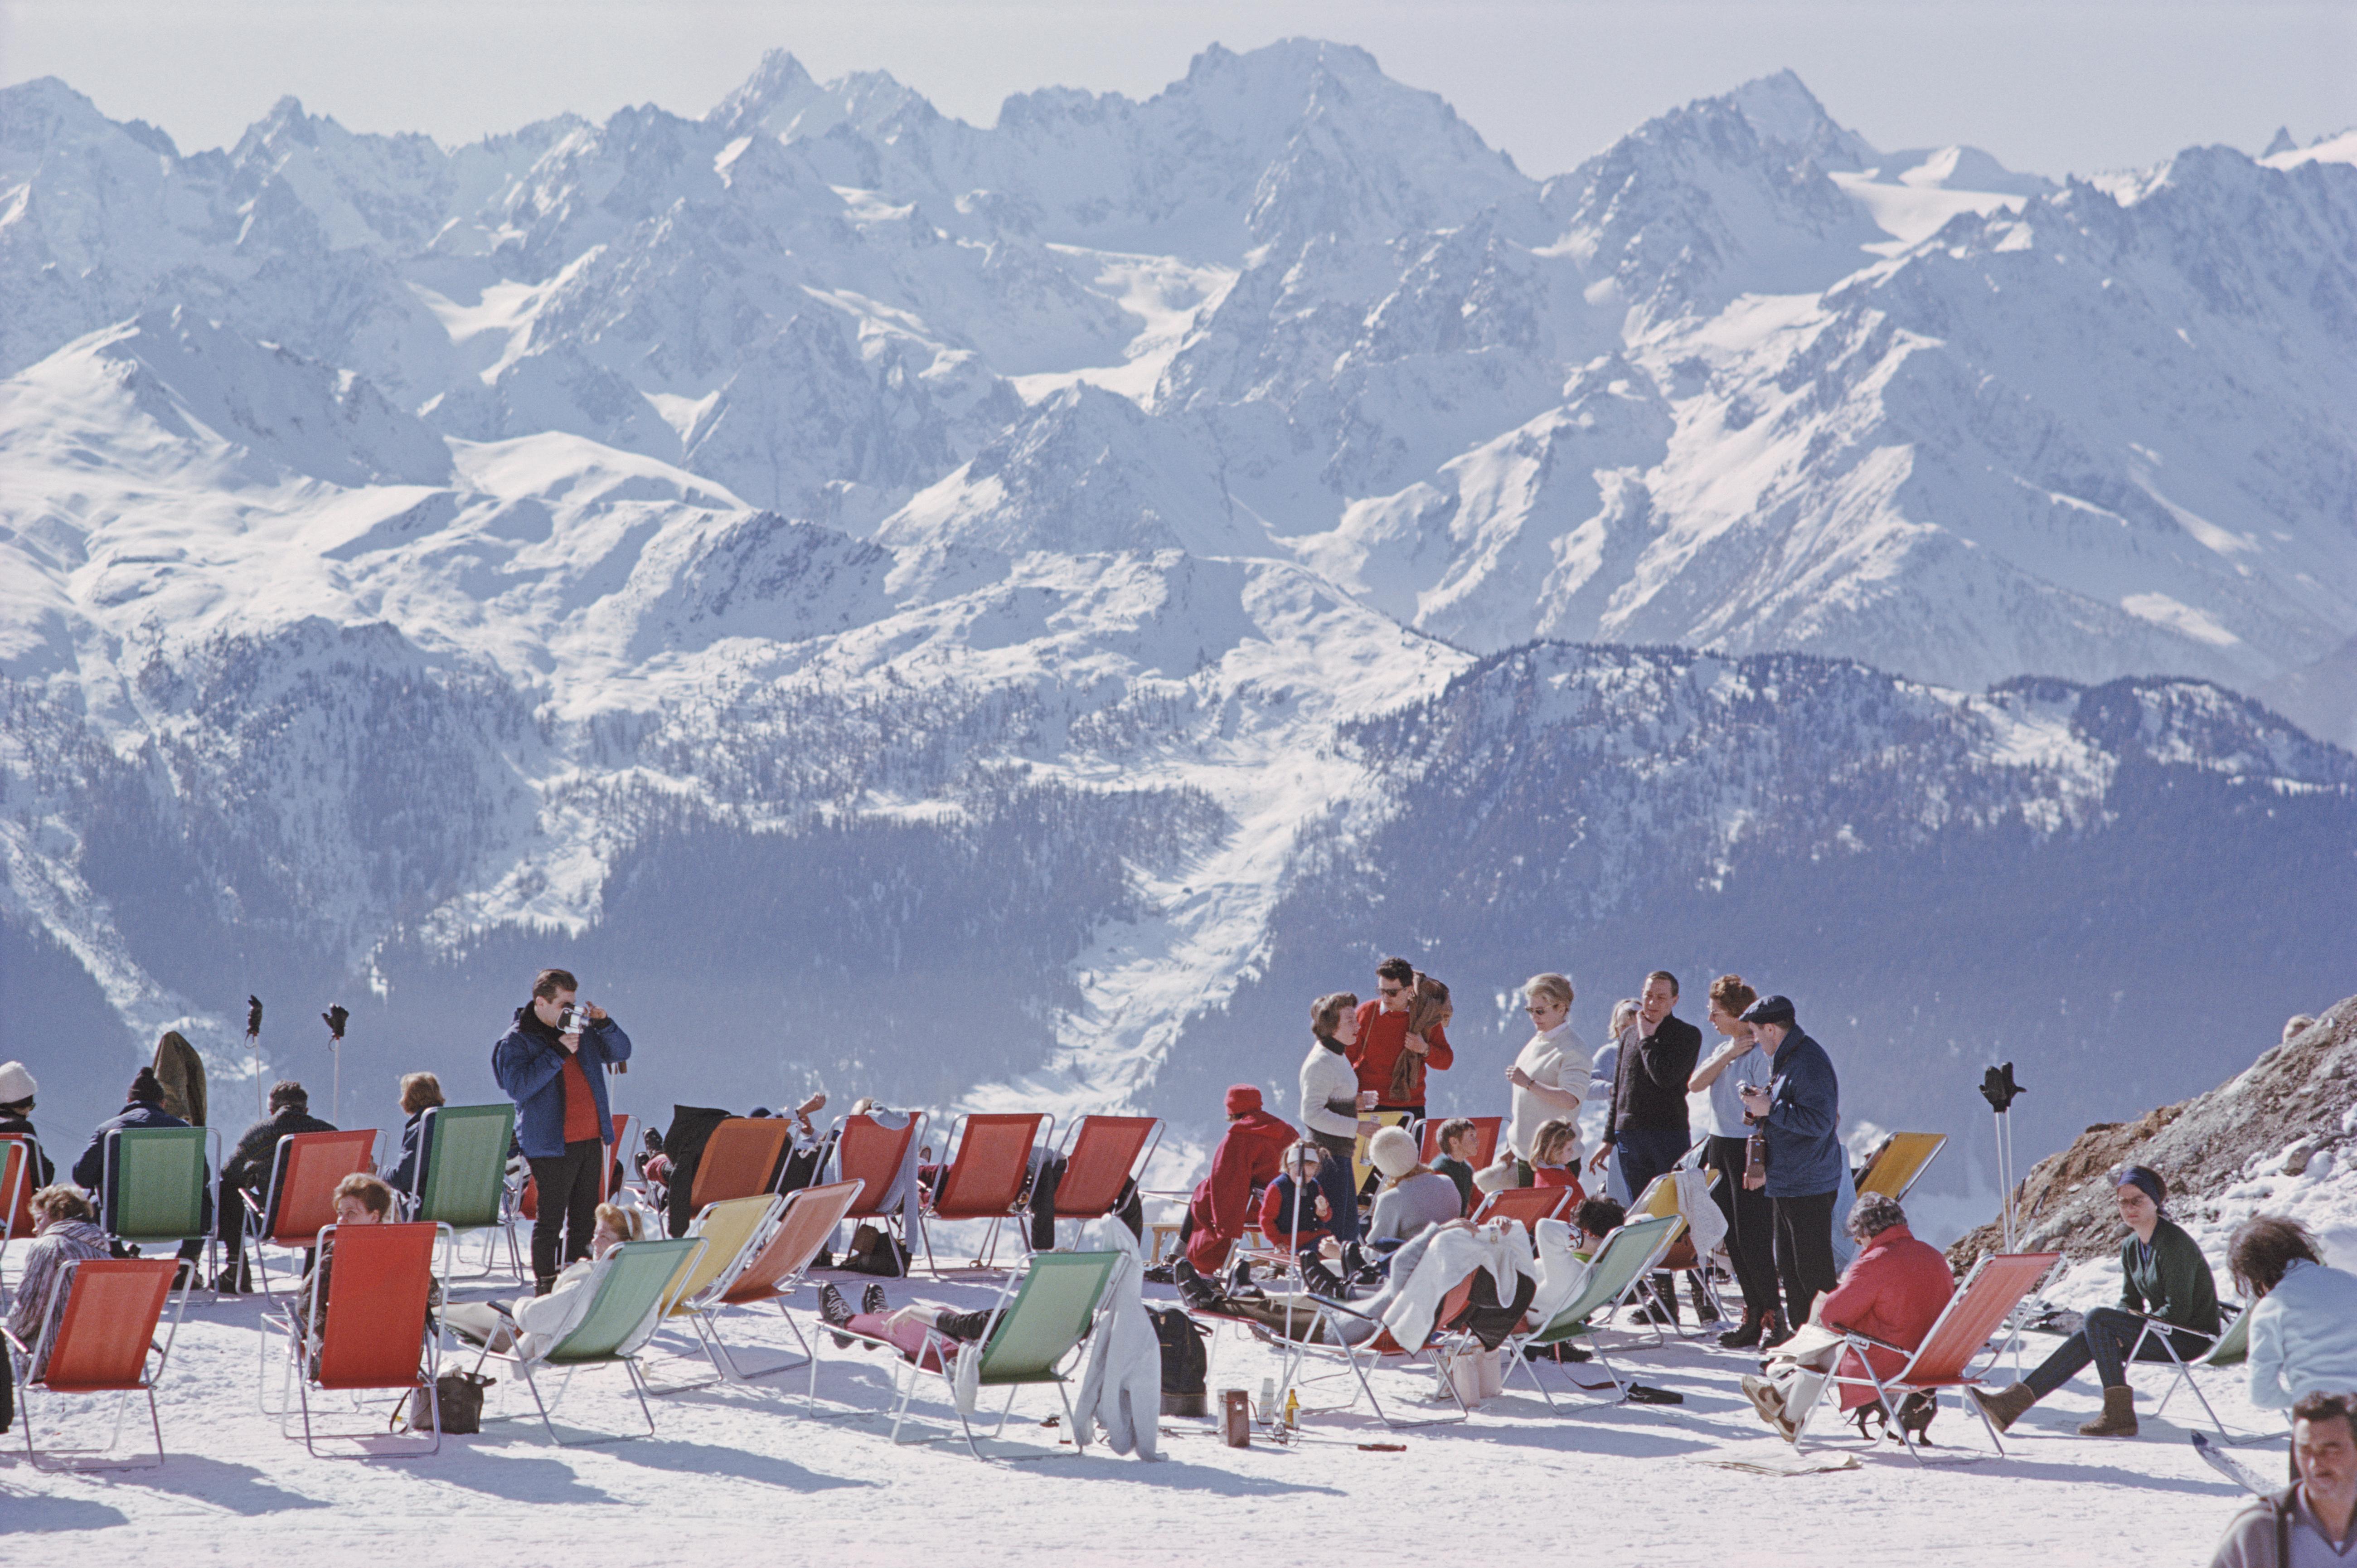 Slim Aarons
Lounging In Verbier, 1964, Printed Later
C print 
Estate stamped and numbered edition of 150 
with Certificate of authenticity

Holidaymakers in sun loungers on the slopes at Verbier, Switzerland, February 1964.

Slim Aarons (1916-2006)